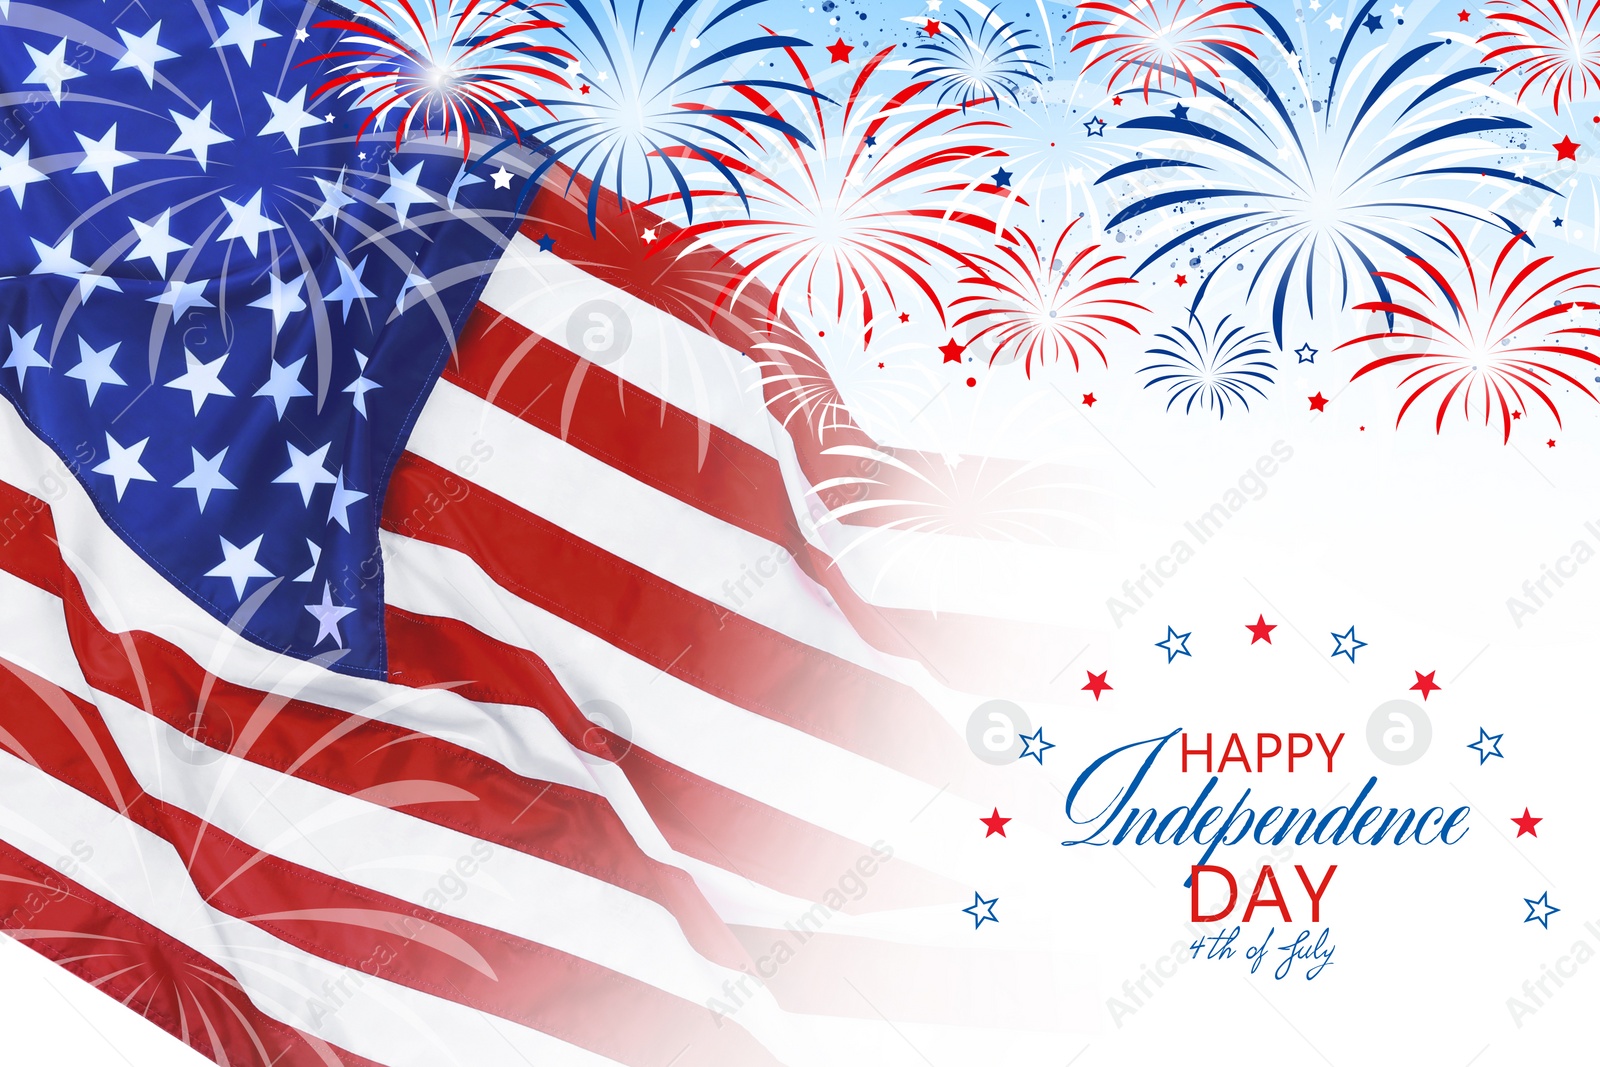 Image of 4th of july - Independence Day of USA. American national flag and fireworks on white background 